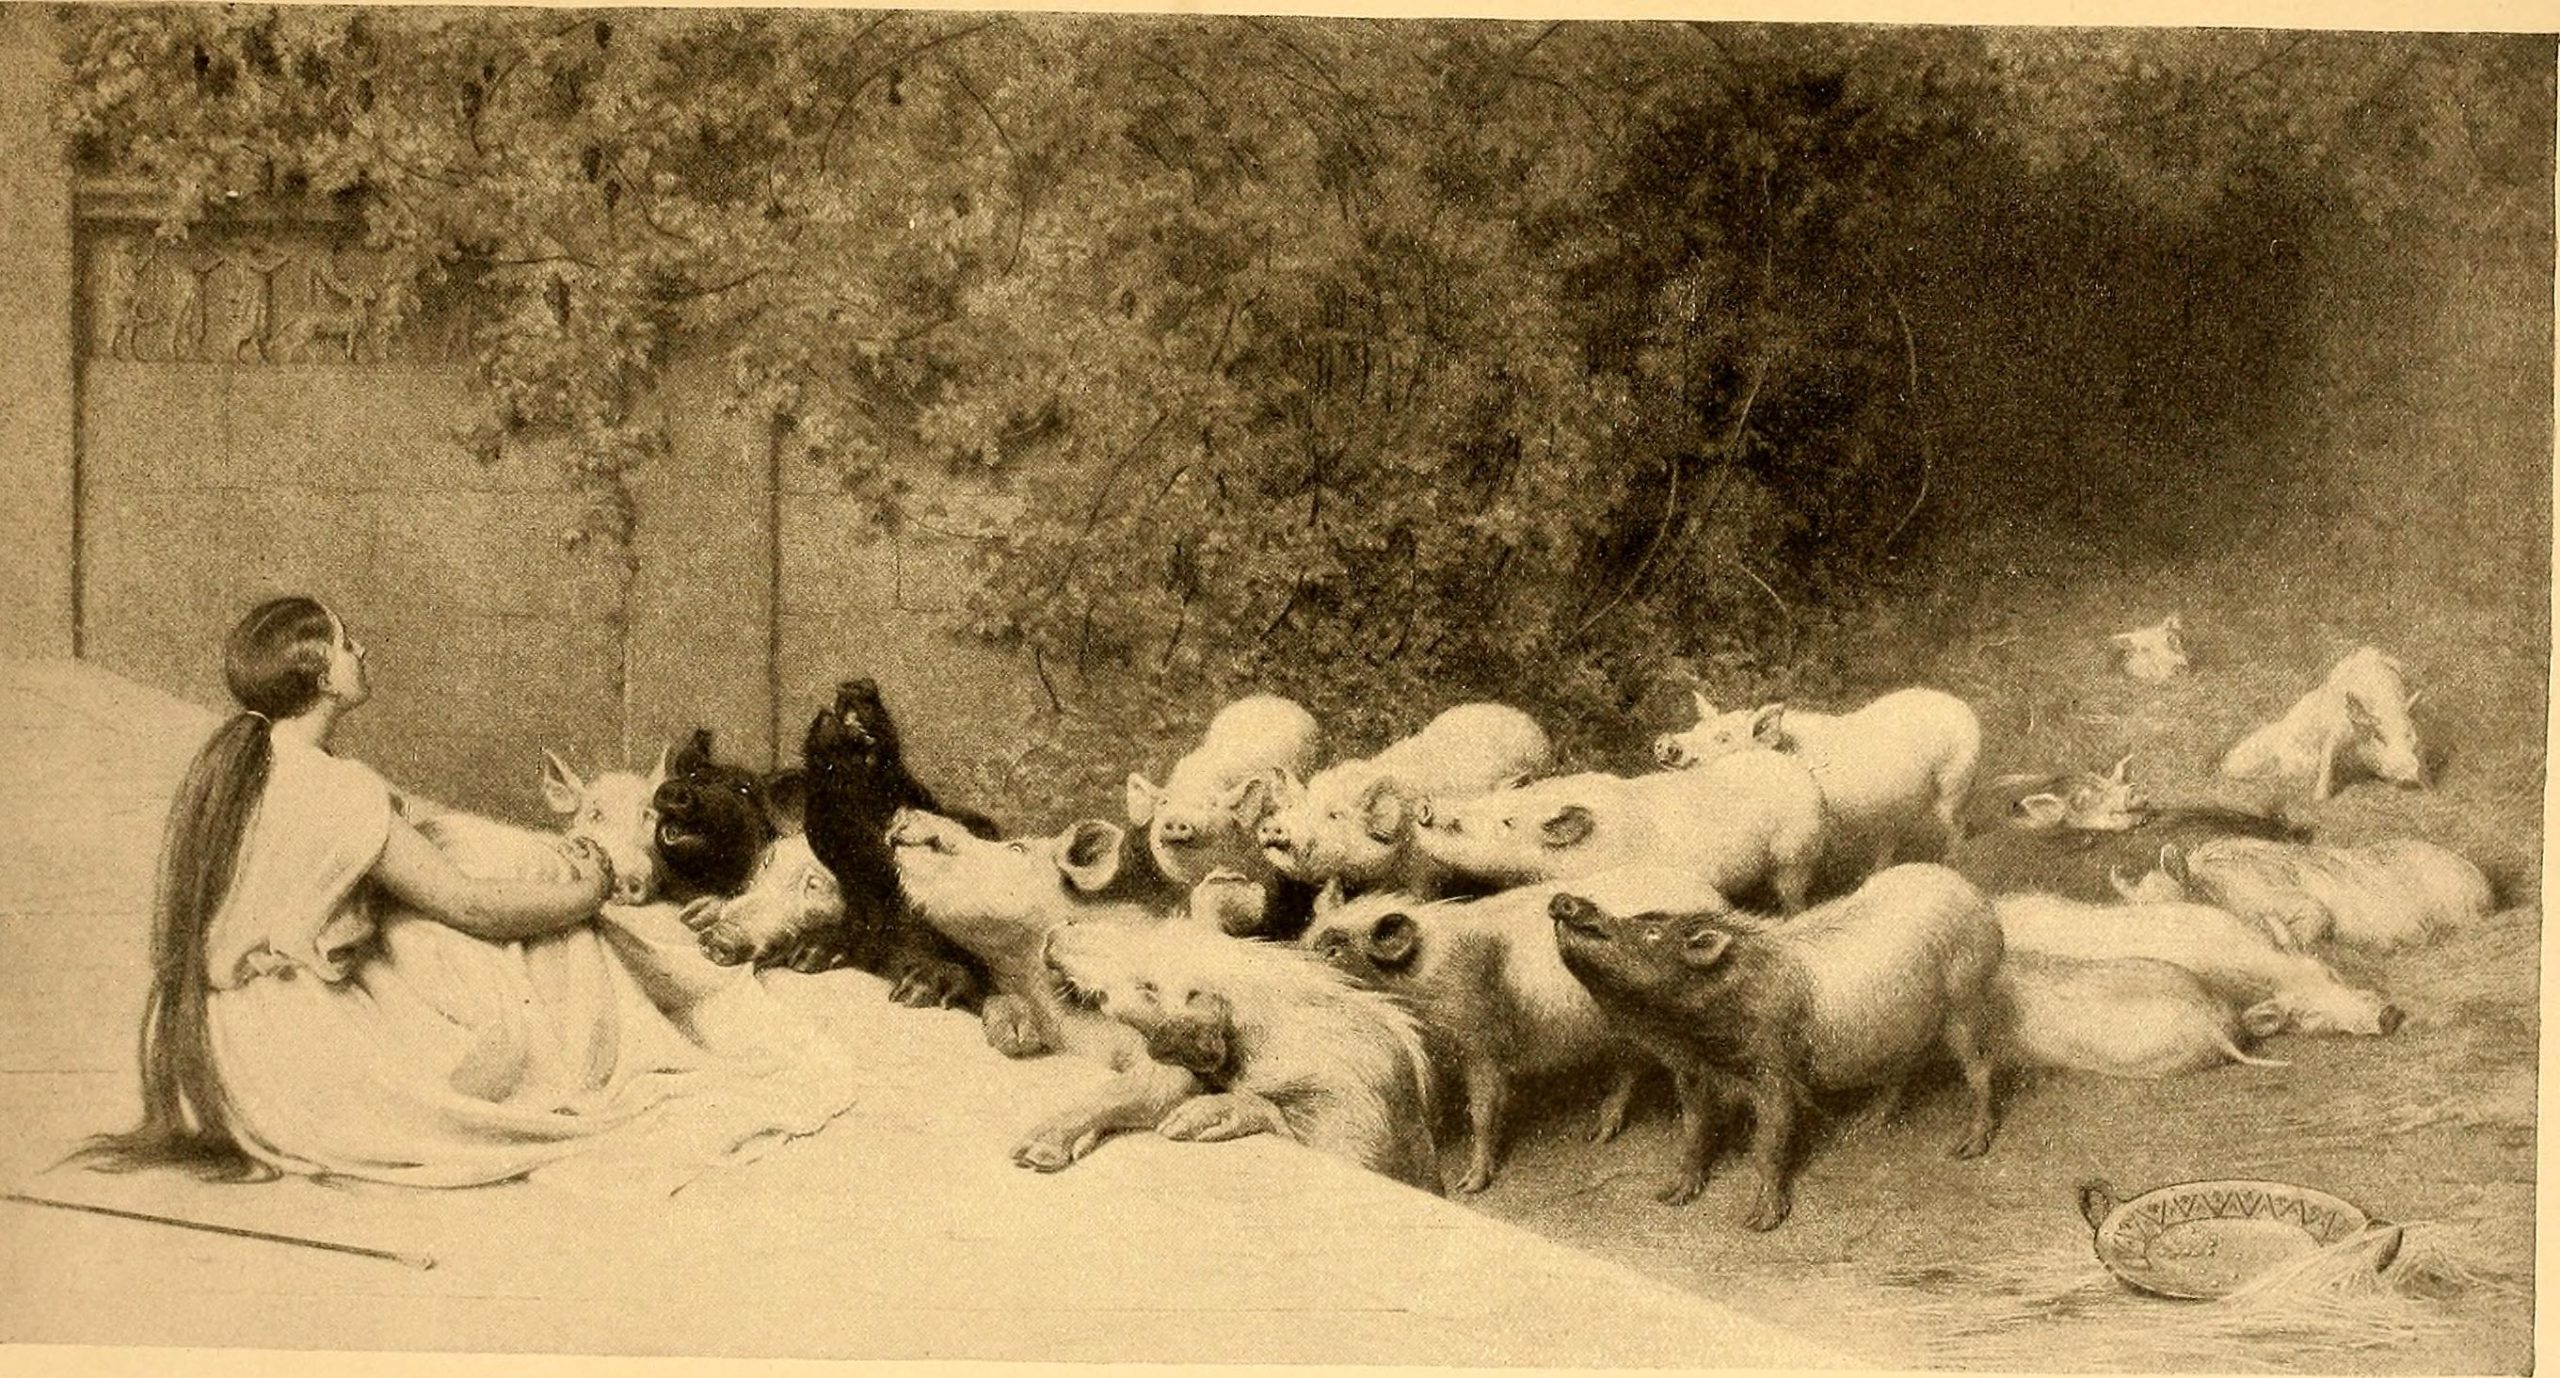 A woman sitting before a group of pigs gathering in front of her.